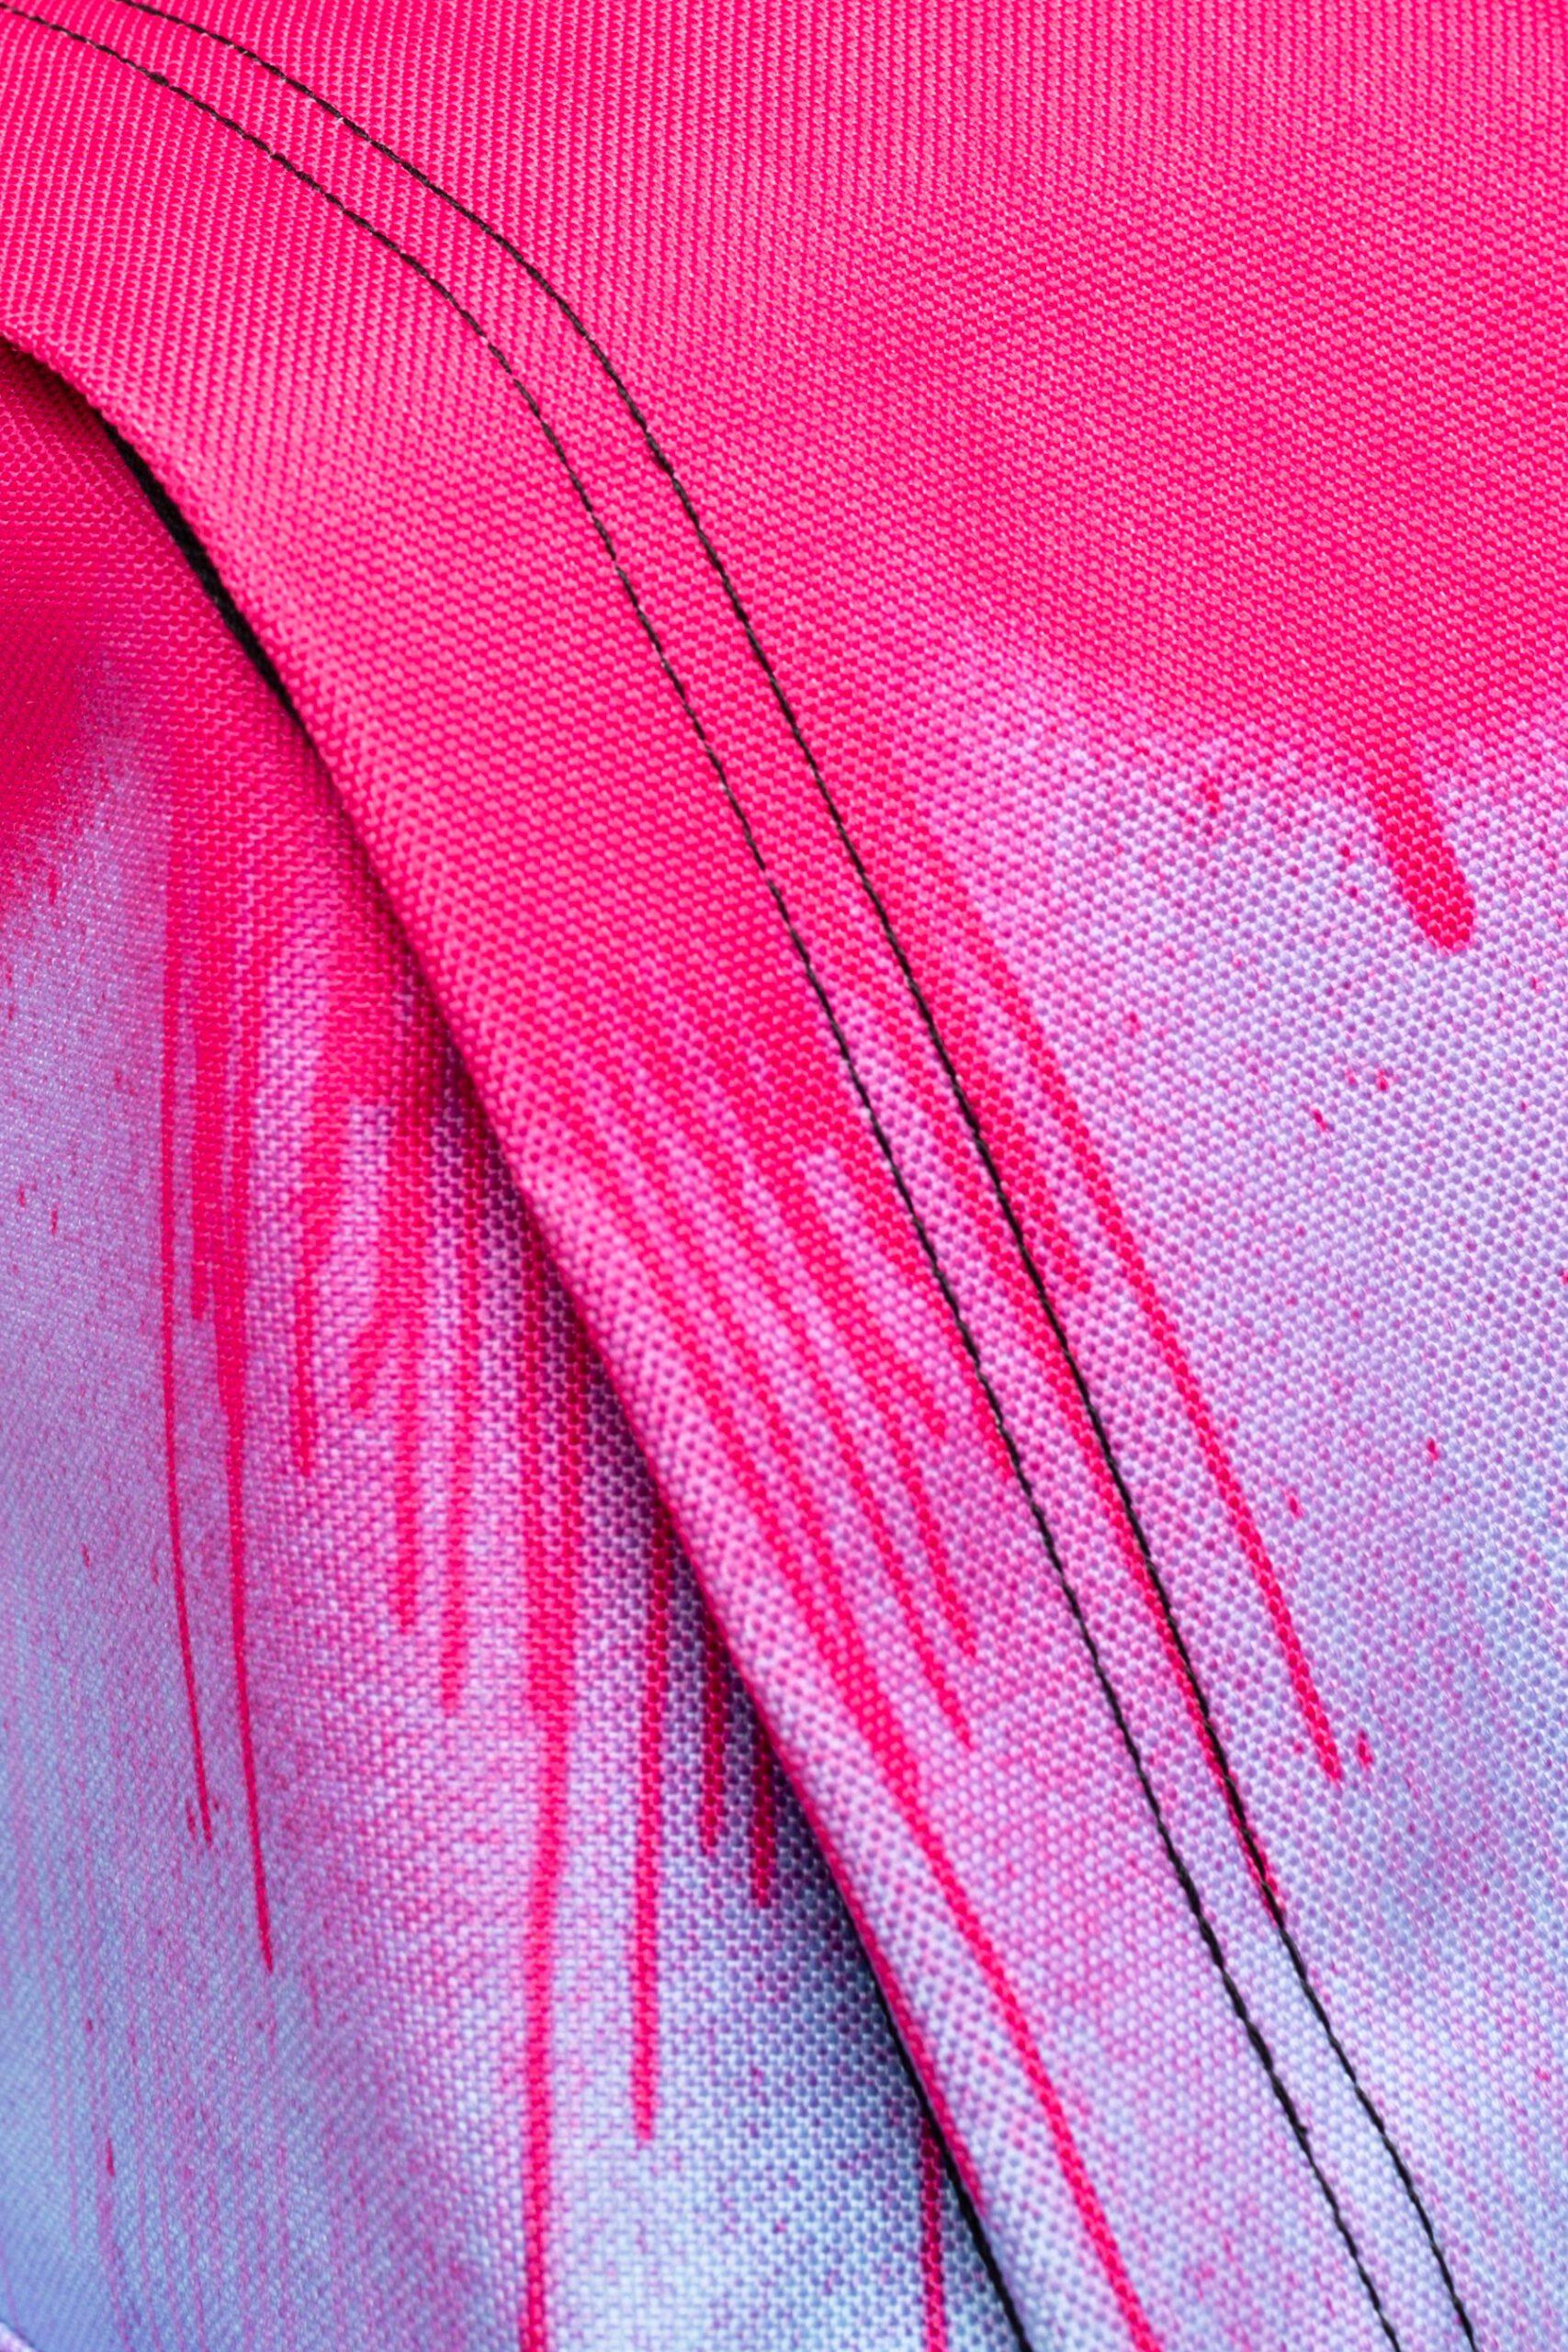 Hype pink and black paint drip backpack seam close up